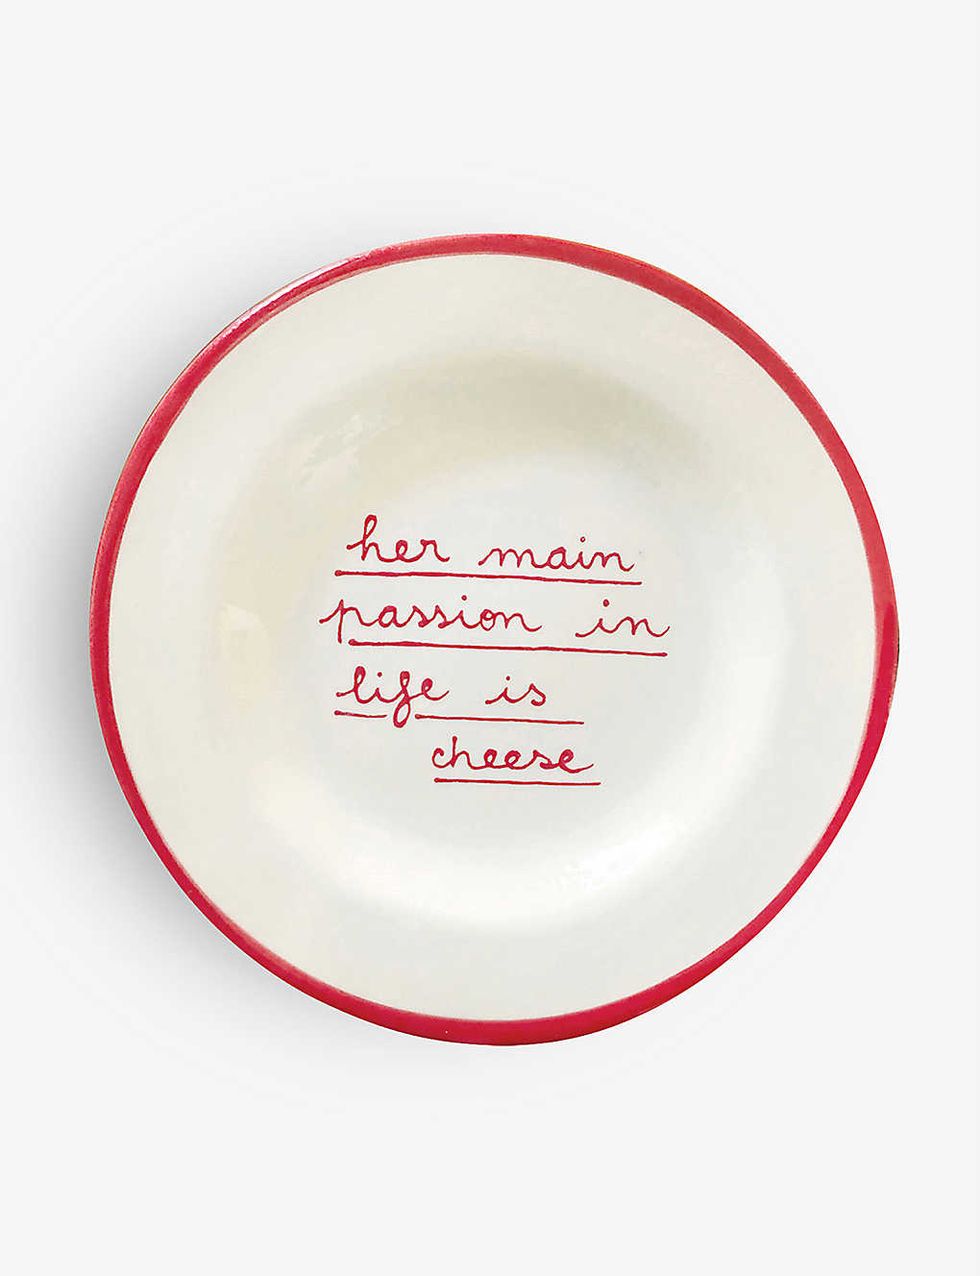 LAETITIA ROUGET Her Main Passion In Life Is Cheese hand-painted ceramic plate 20cm